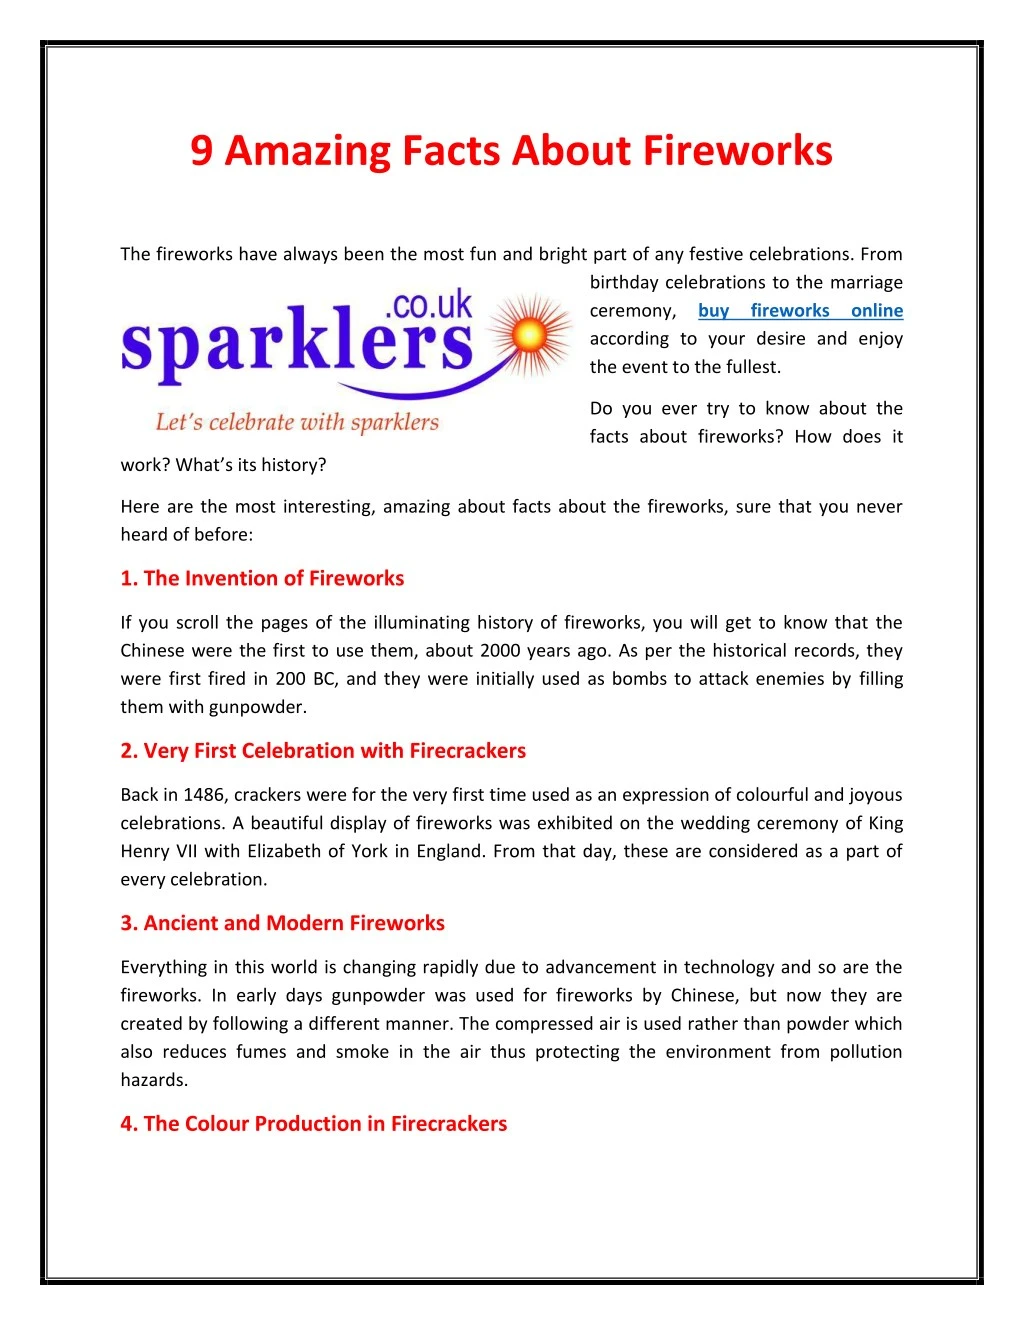 9 amazing facts about fireworks